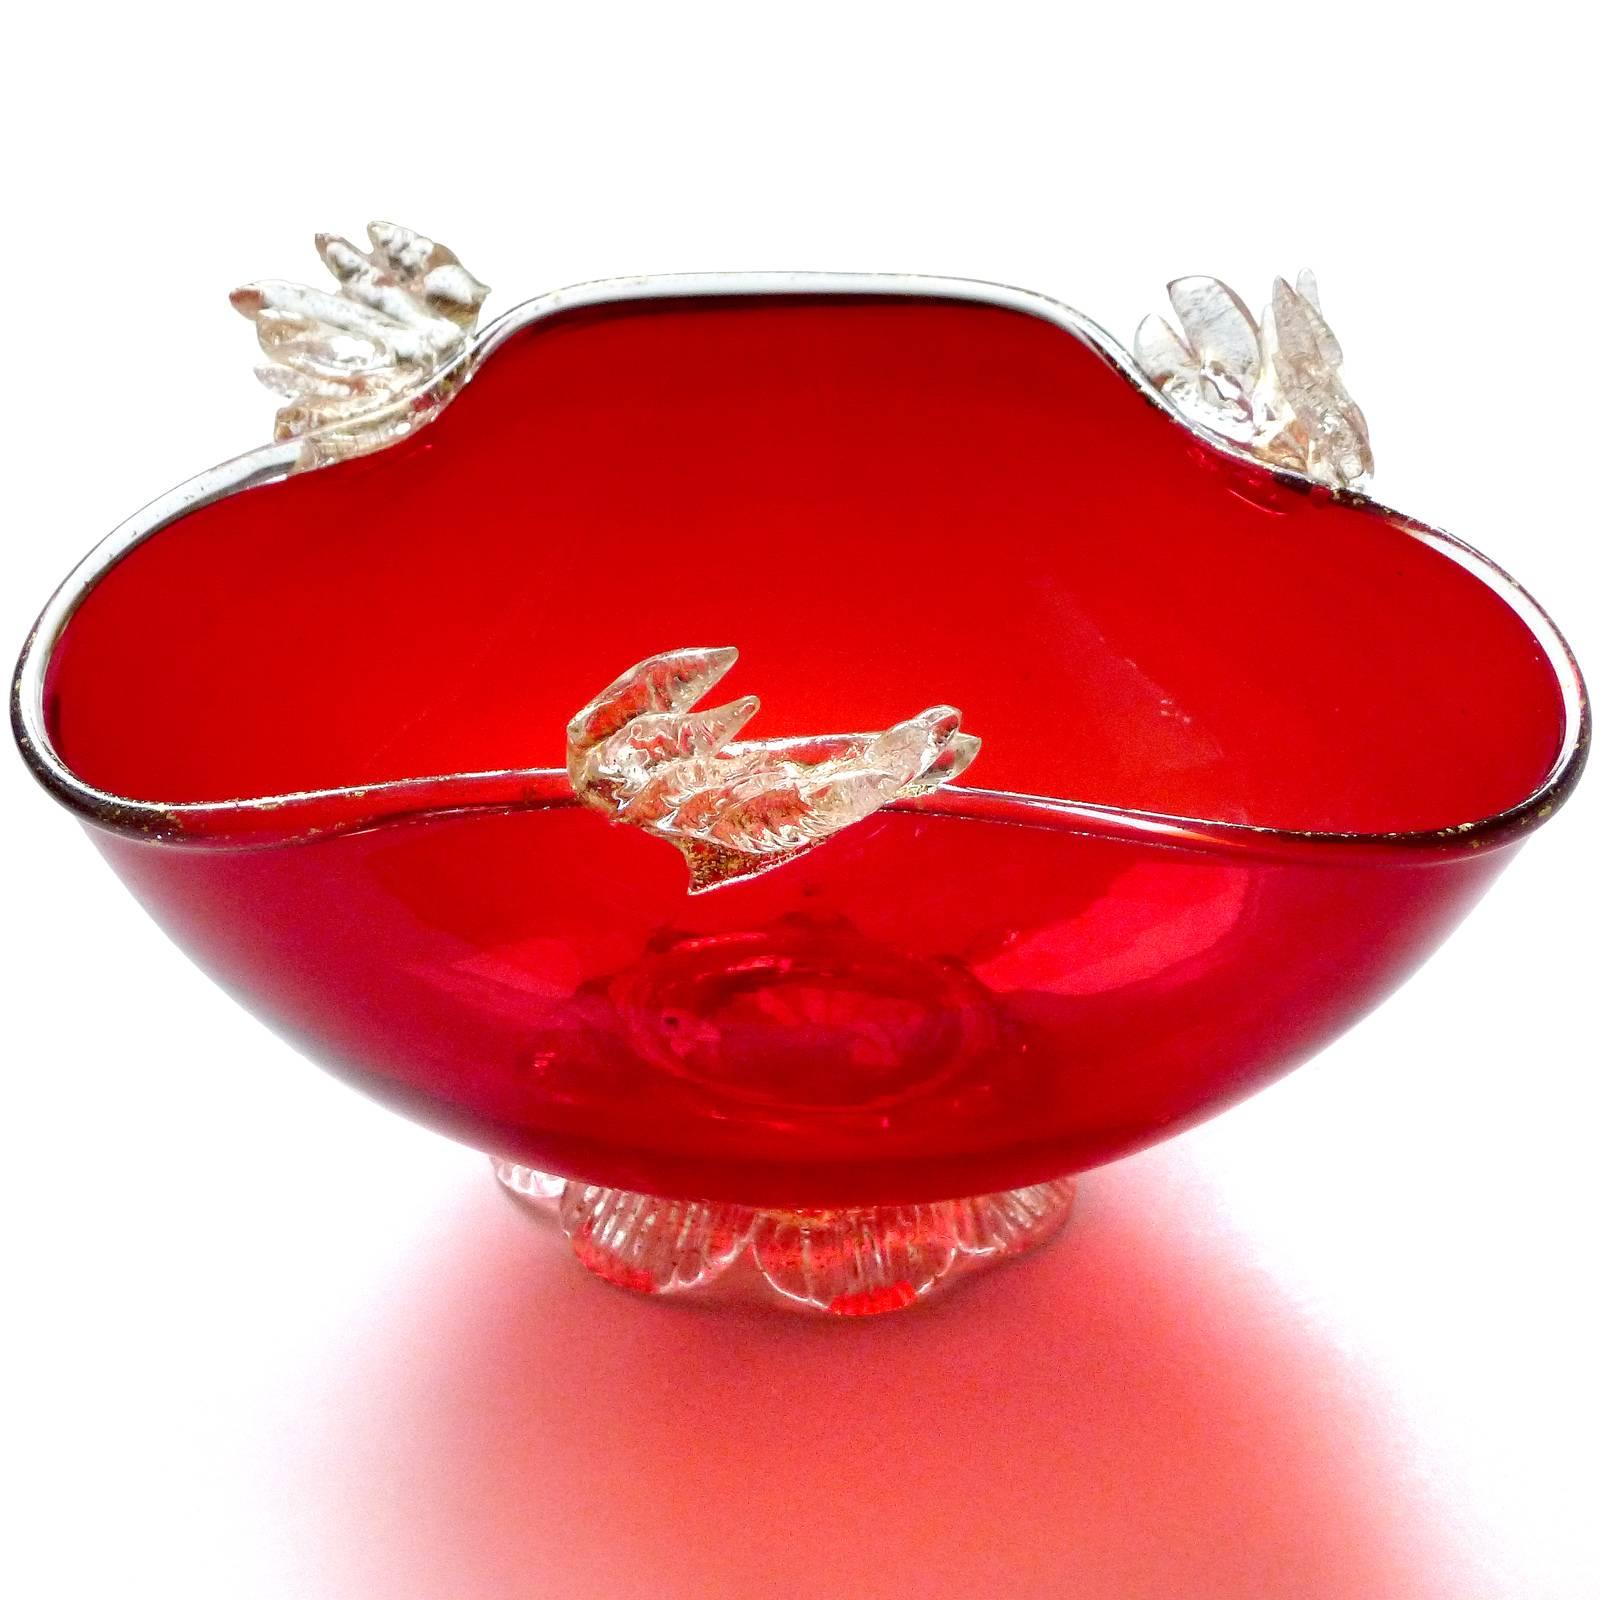 Beautiful vintage Murano handblown red and applied gold leaves Italian art glass footed candy bowl and dish. Created in the Venetian style, dating to the 1930s-1940s. The dish has an applied foot, and gold leaf all along the rim. Can be used as a